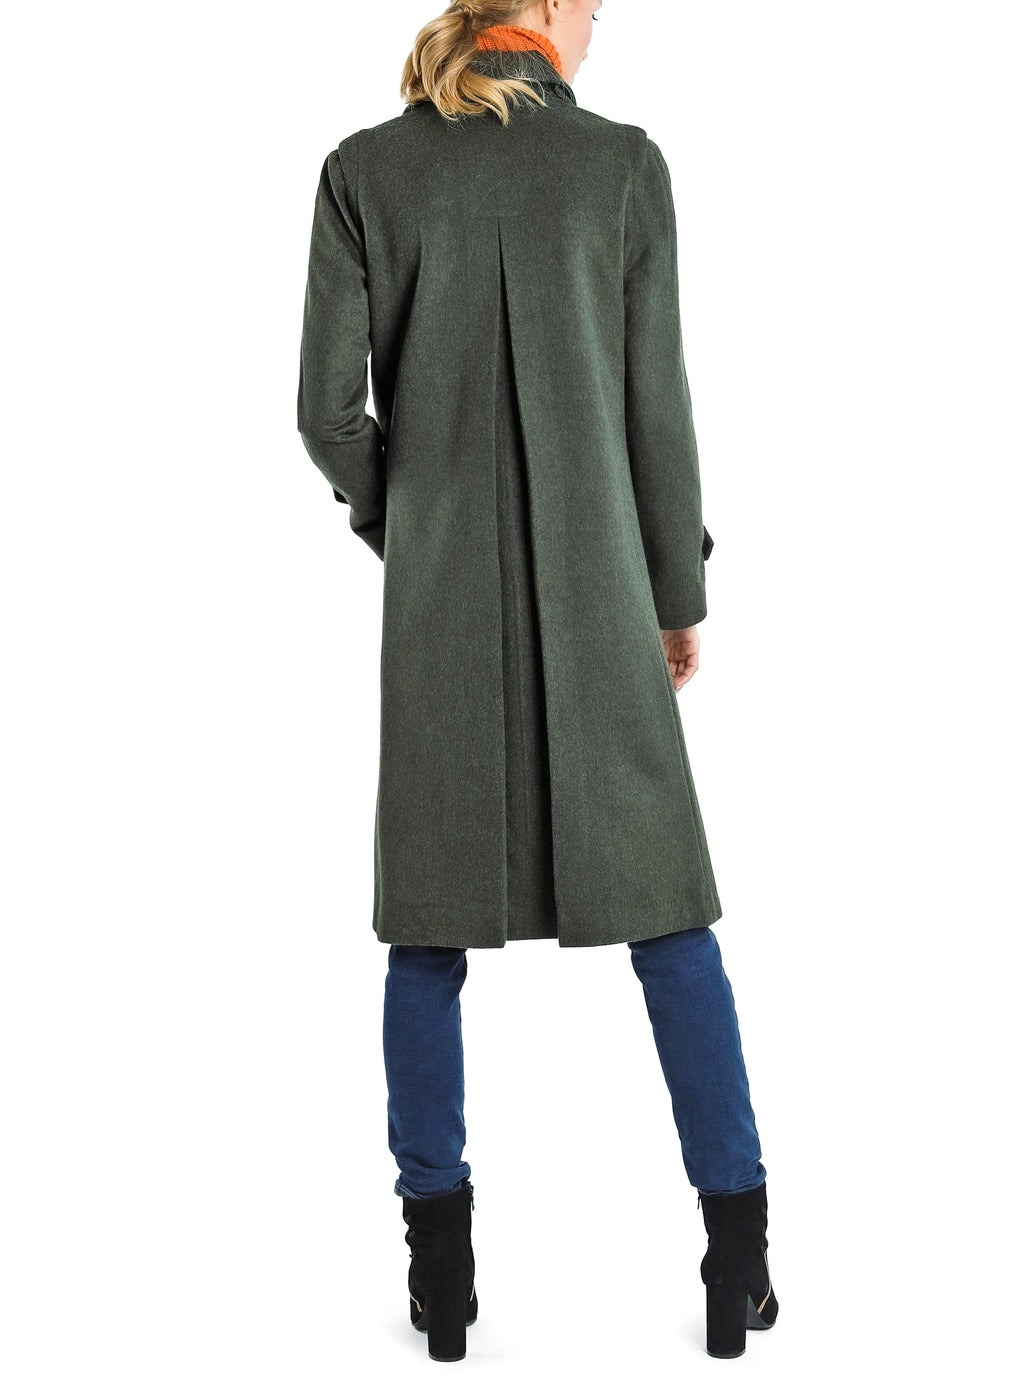 Bavarian Loden coat from sage-green loden